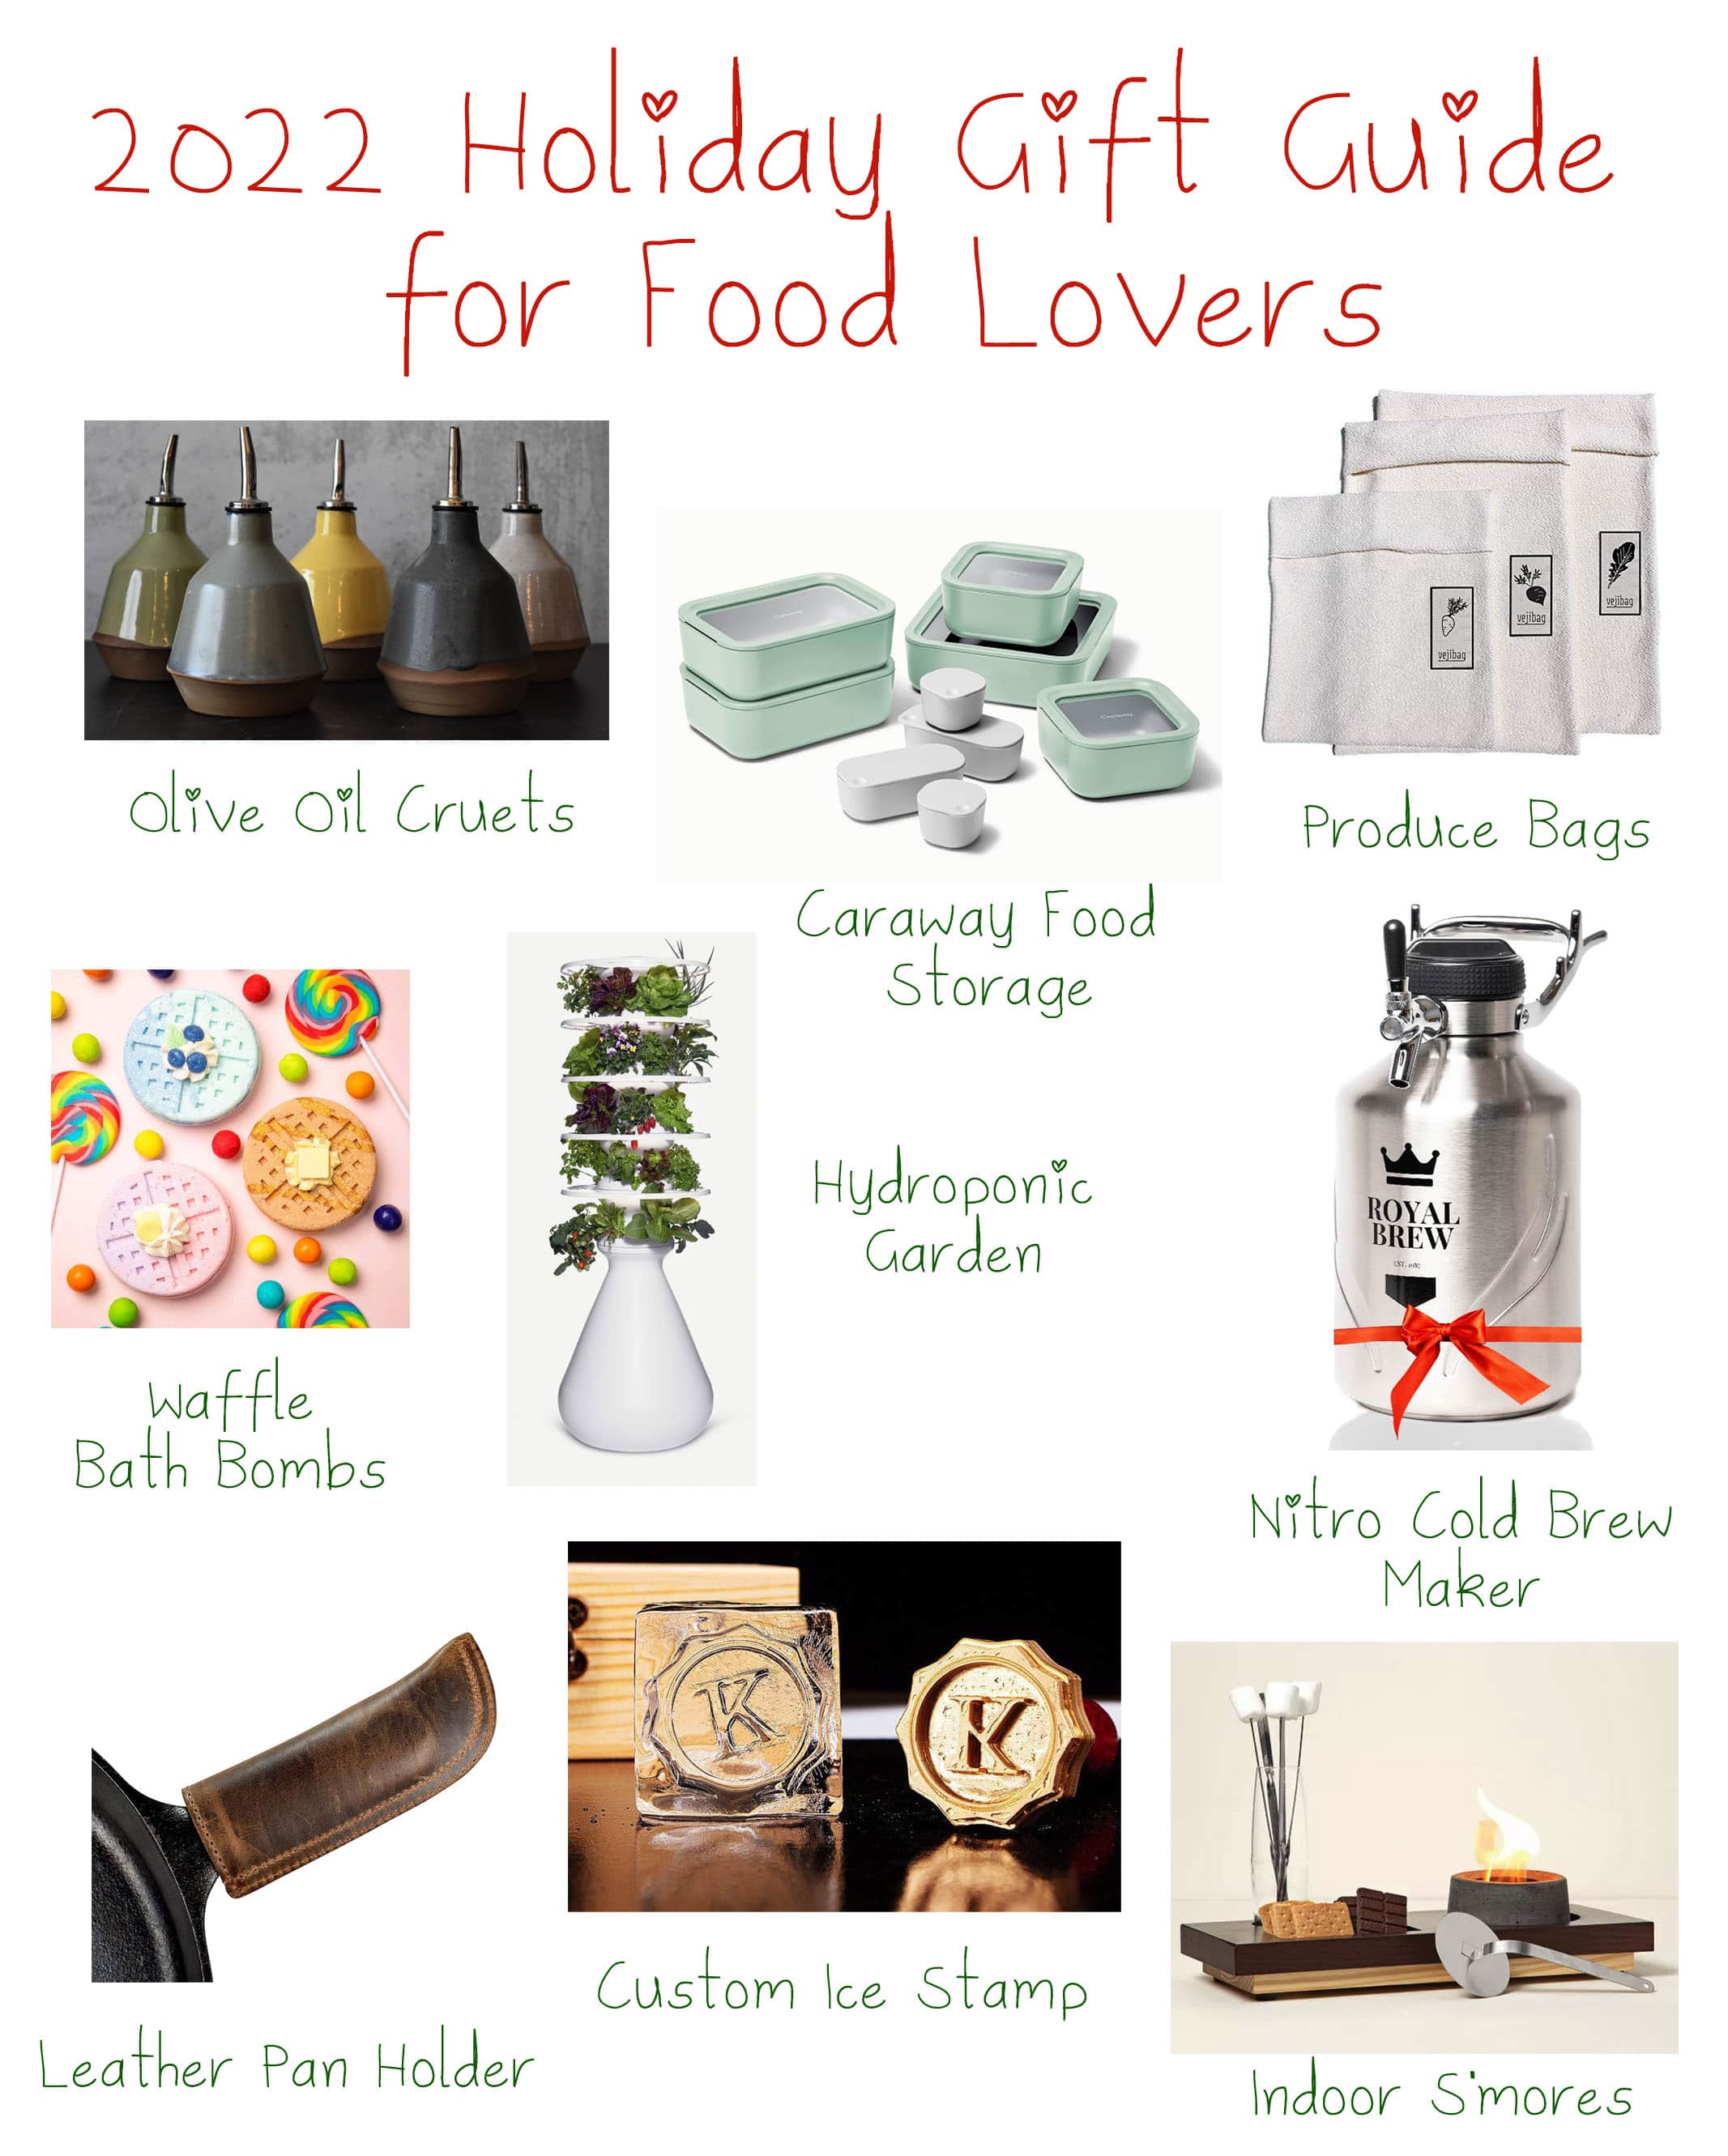 2022 Holiday Gift Guide for Food Lovers